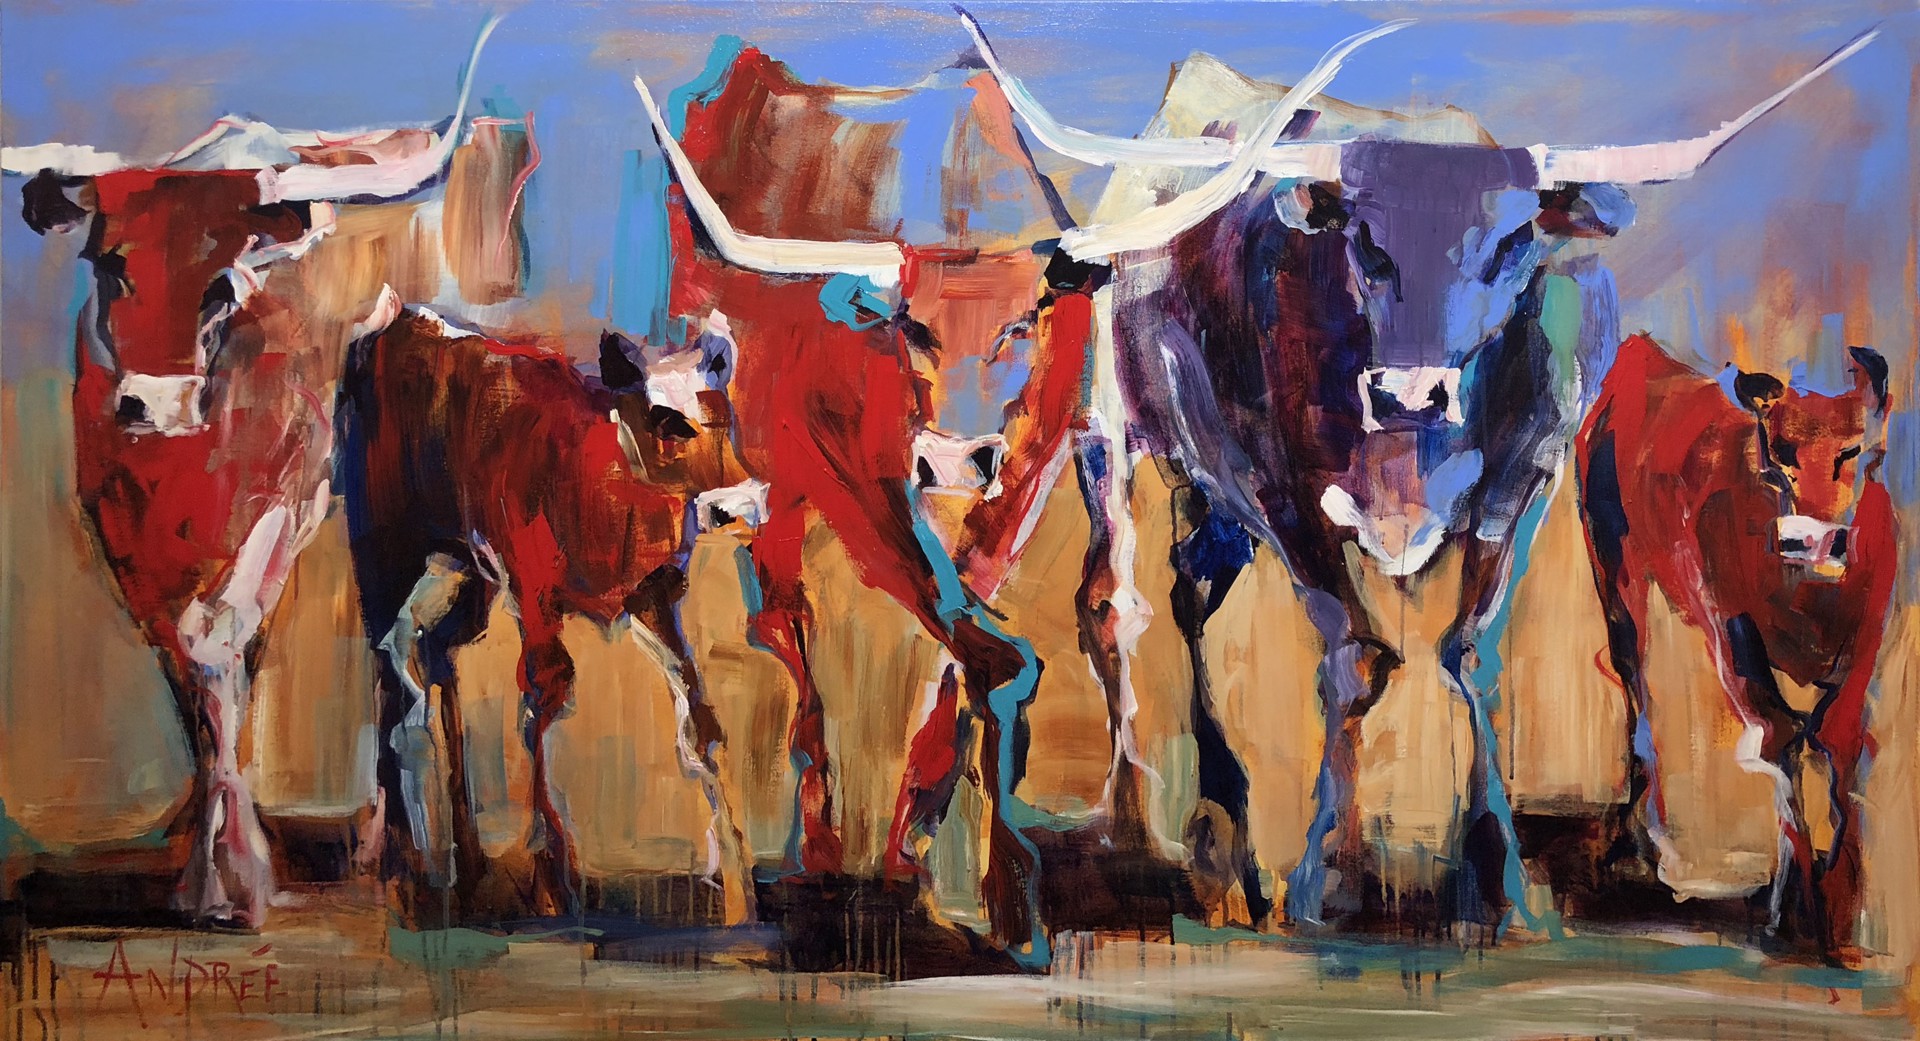 With The Calves by Andrée Hudson